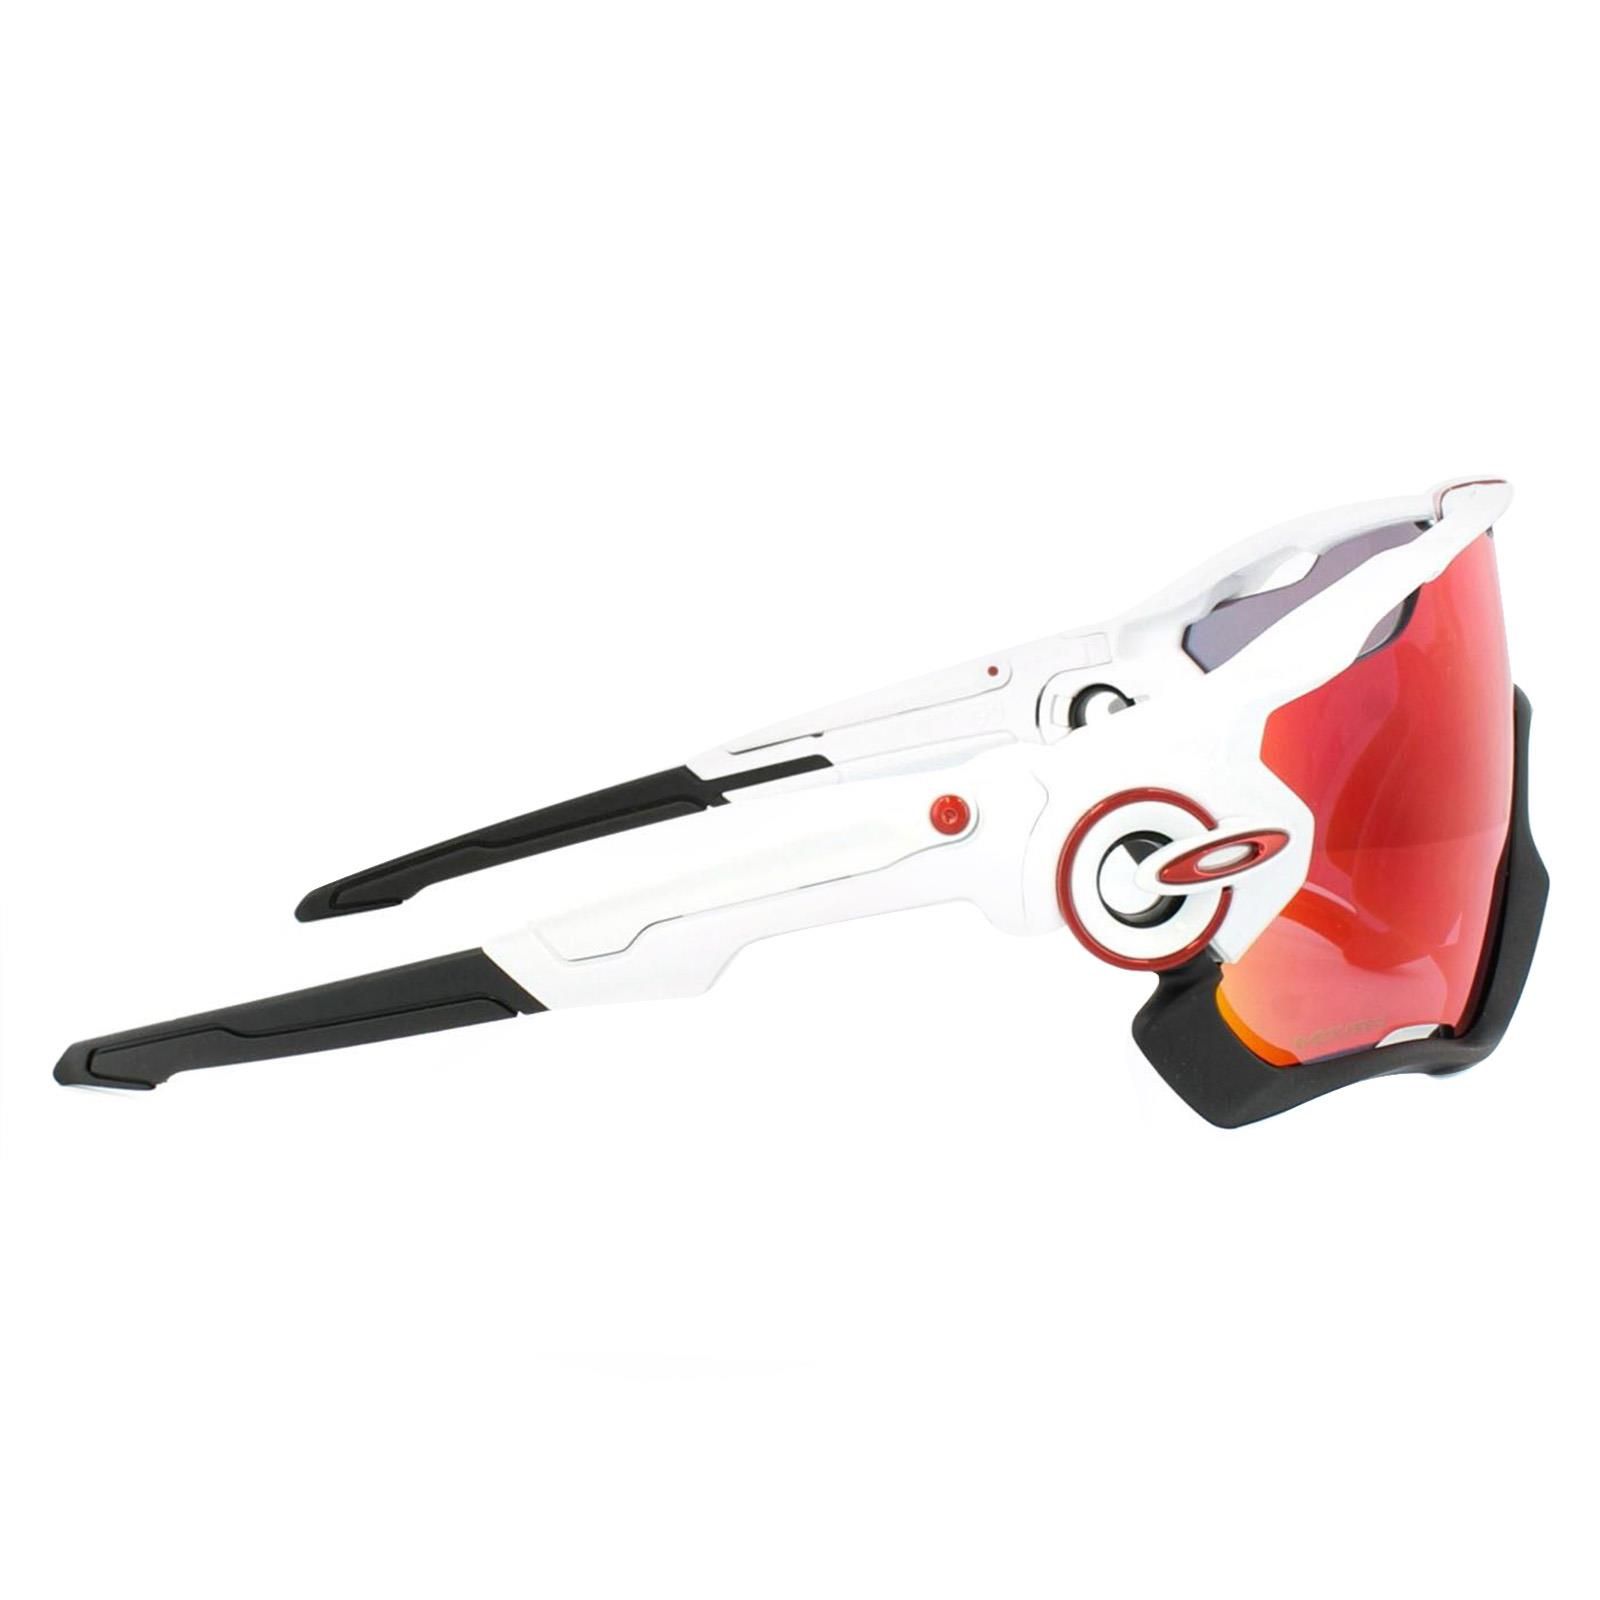 Oakley Sunglasses Jawbreaker OO9290-05 Polished White Prizm Road is the latest in cutting edge design for anyone with an enjoyment of sports. An easily opened hinge allows simple lens changing for different conditions and flexible suspension allows the lens to move with the frame rather than being distorted in any way. An interchangeable nosepiece completes this superb innovative frames in to the best there is.